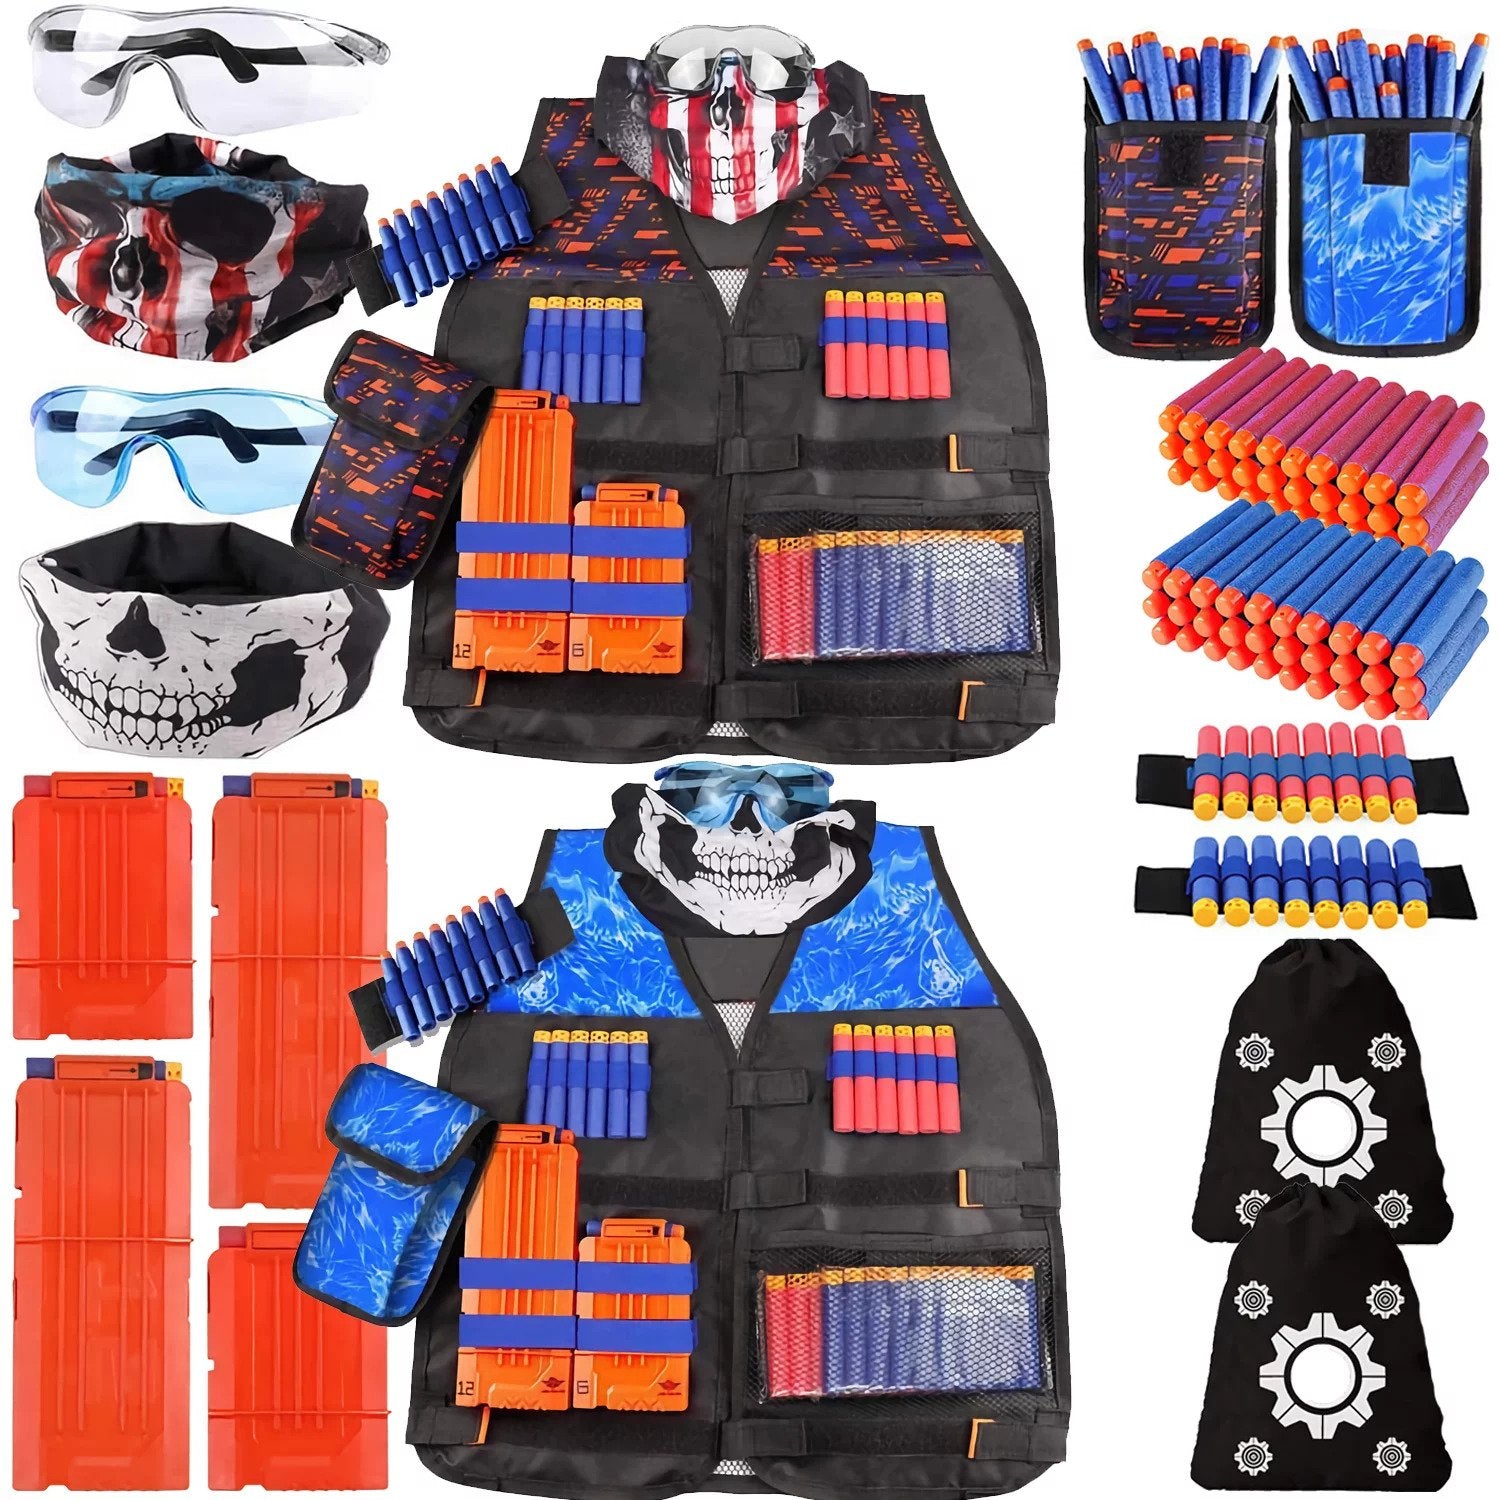 Kids Tactical Vest Kit 2 Pack Compatible with Nerf Guns N-Strike Elite Series with 120 Pcs Refill Darts, 2 Reload Clips, 2 Face Masks, 2 Wrist Bands, 2 Dart Pouchs, 2 Protective Glasses